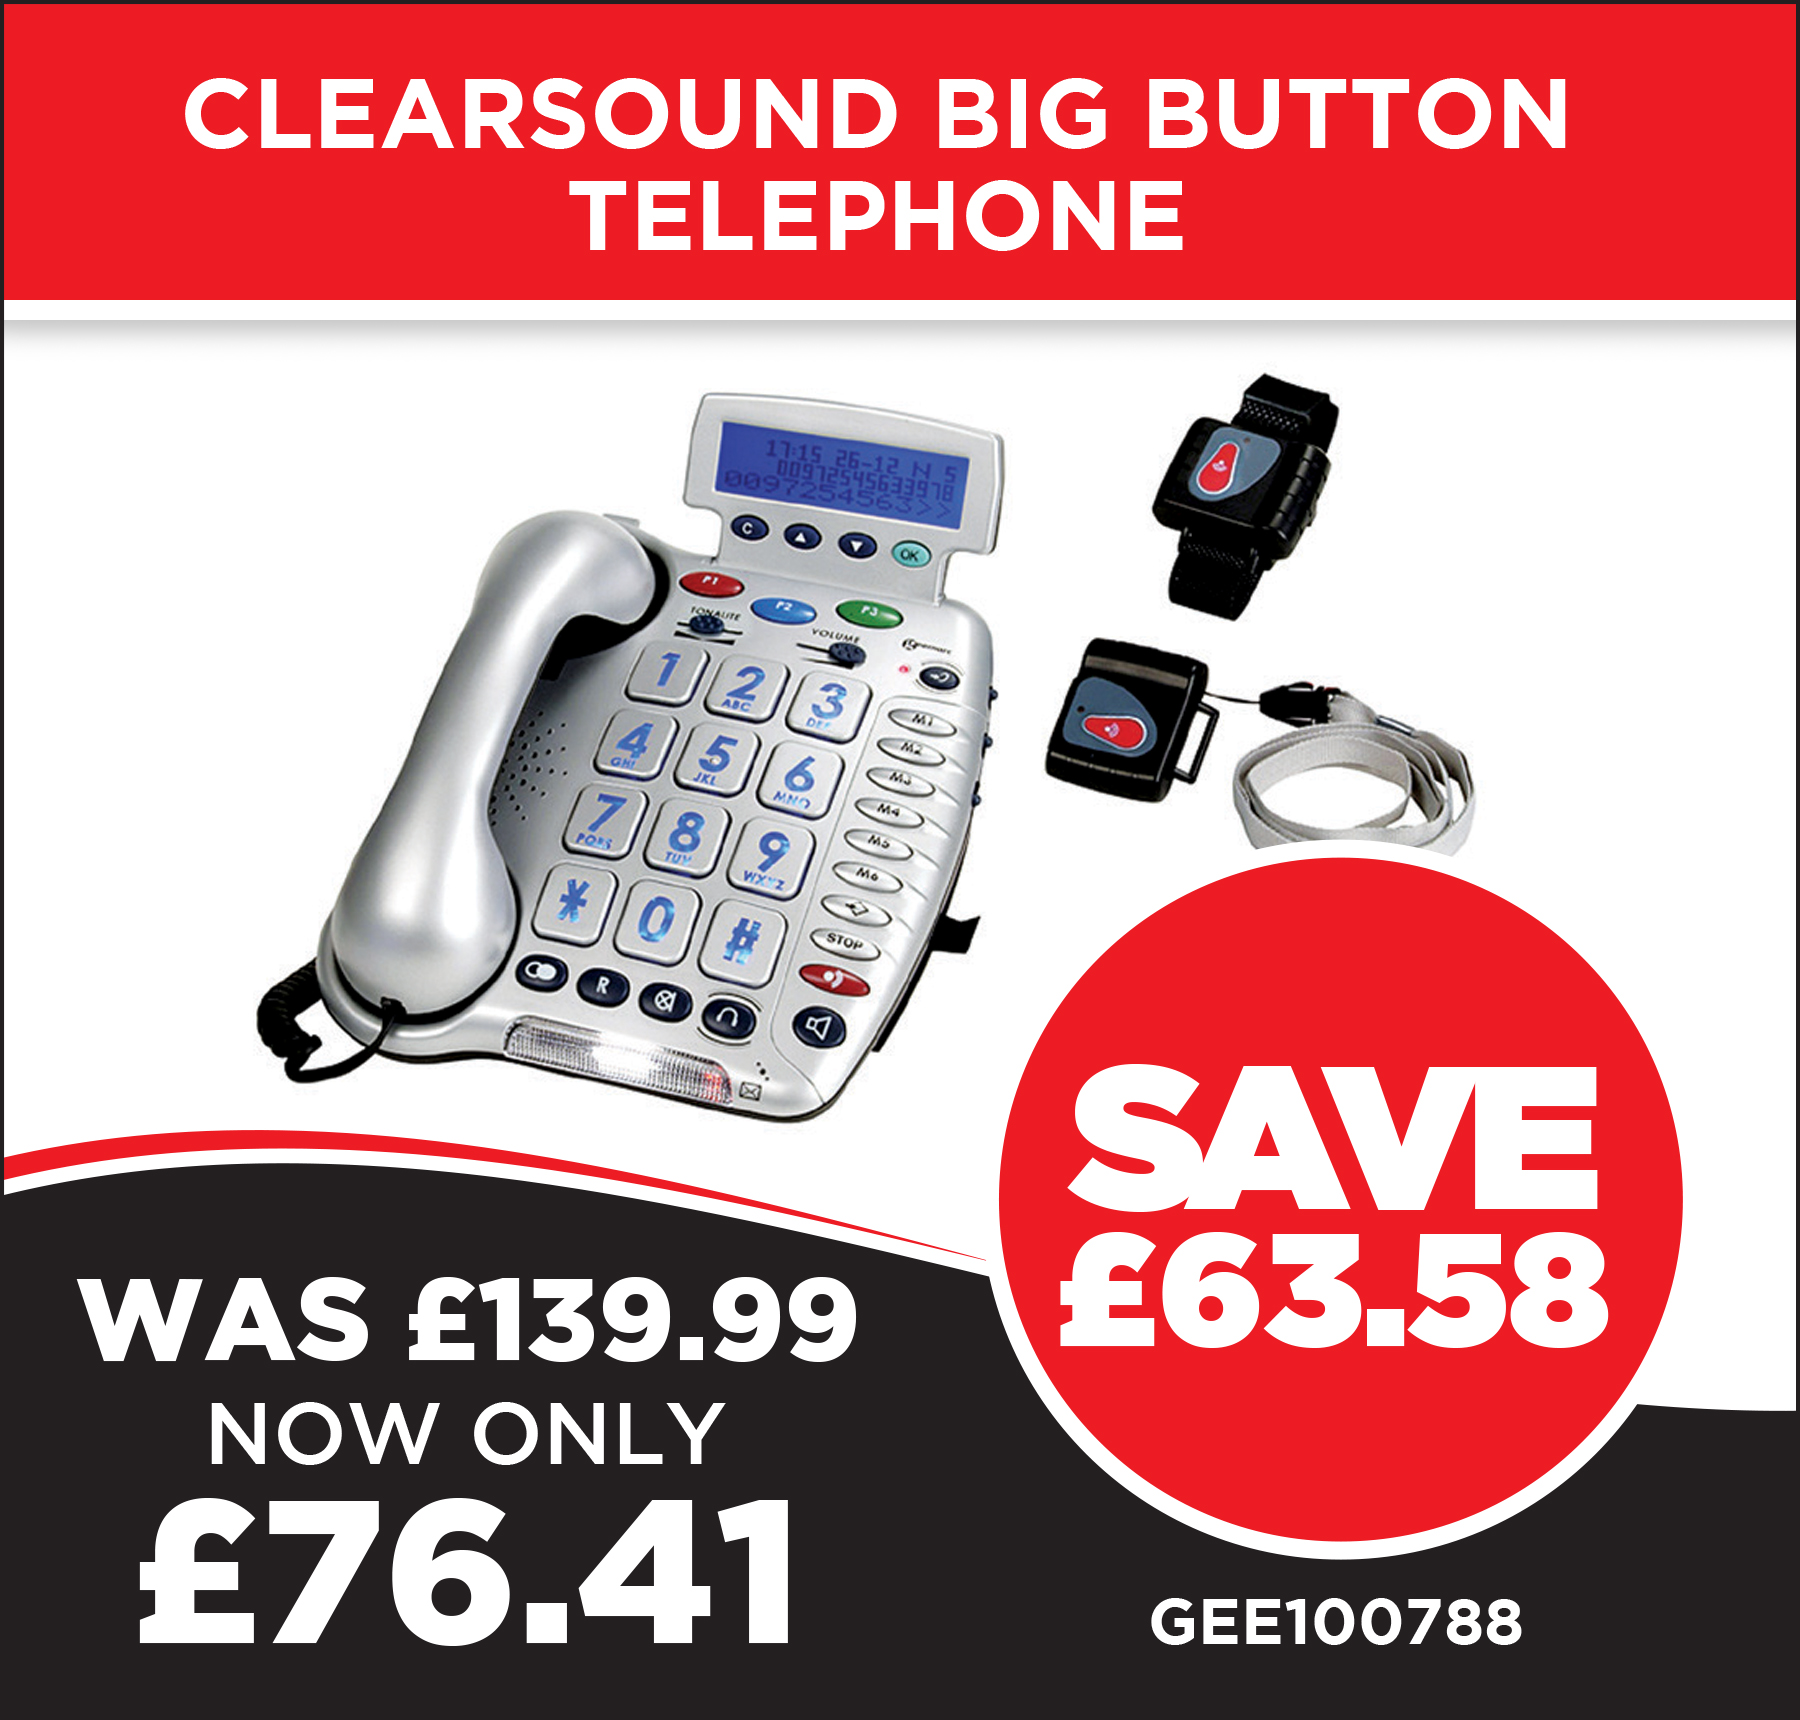 Clearsound Big Button Telephone